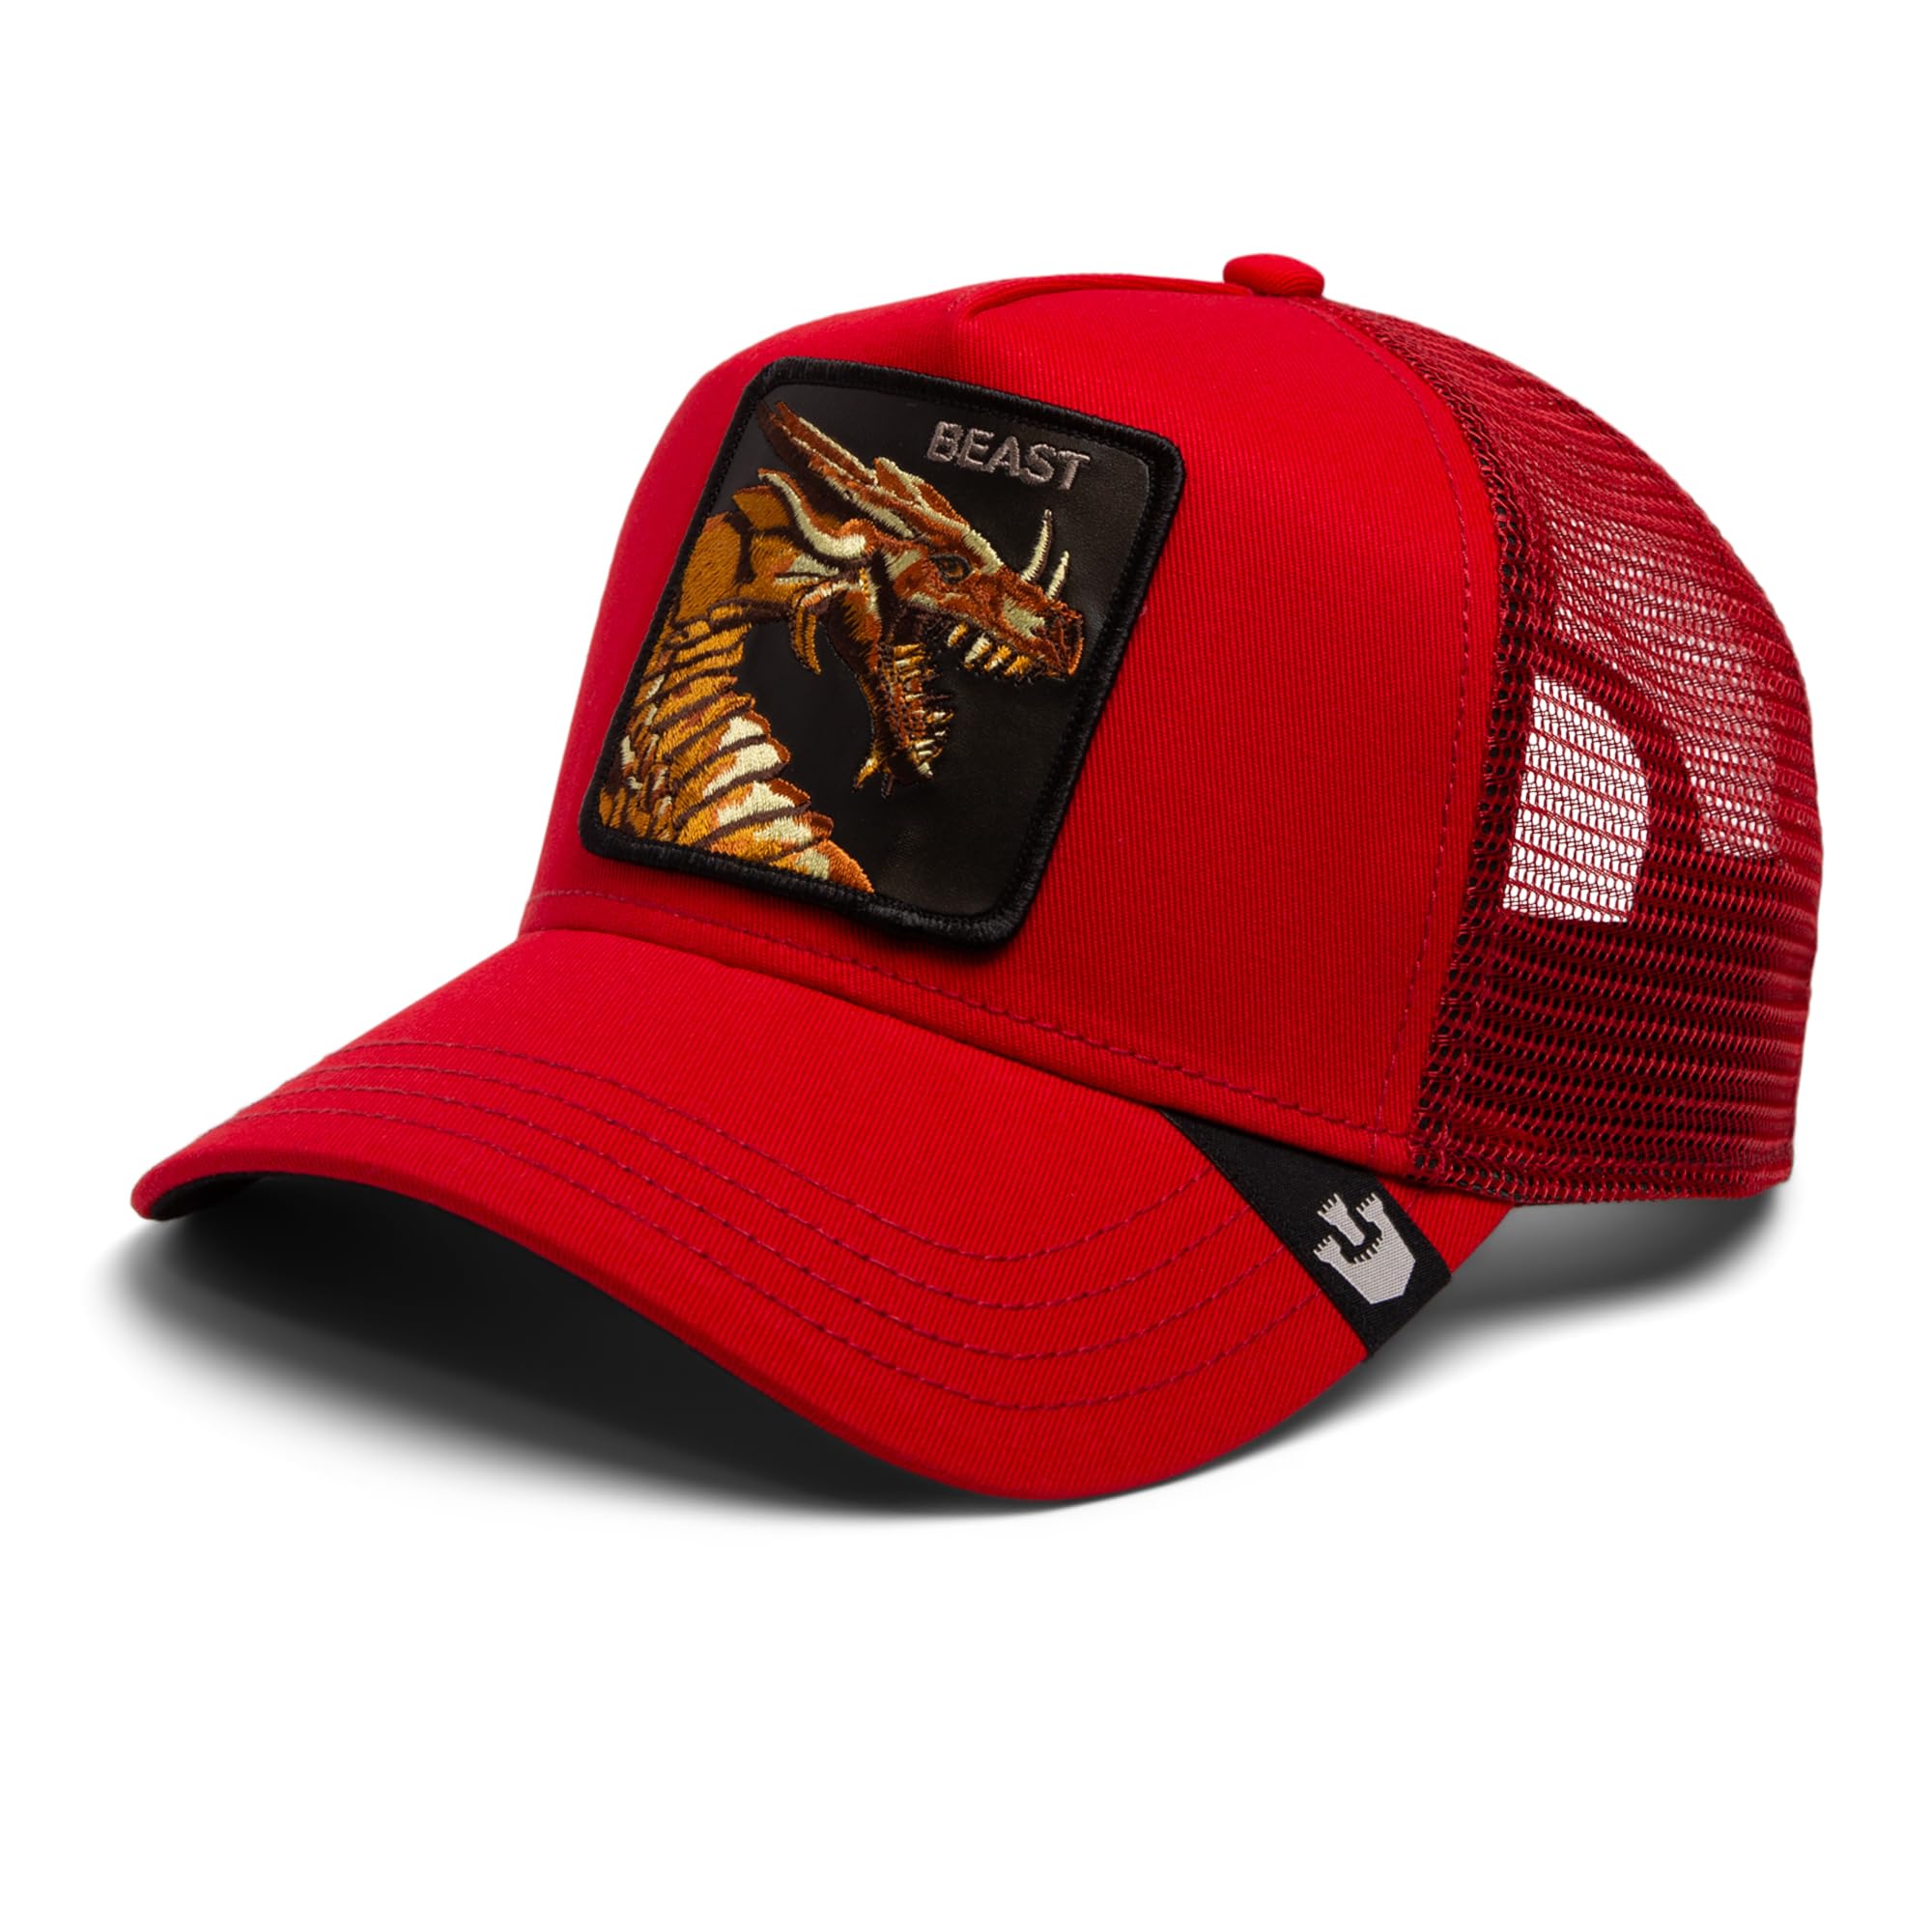 Goorin Bros. The Farm Unisex Original Adjustable Snapback Trucker Hat, Red (The Dragon Beast), One Size - Caps Fitted Caps Fitted Goorin Bros.